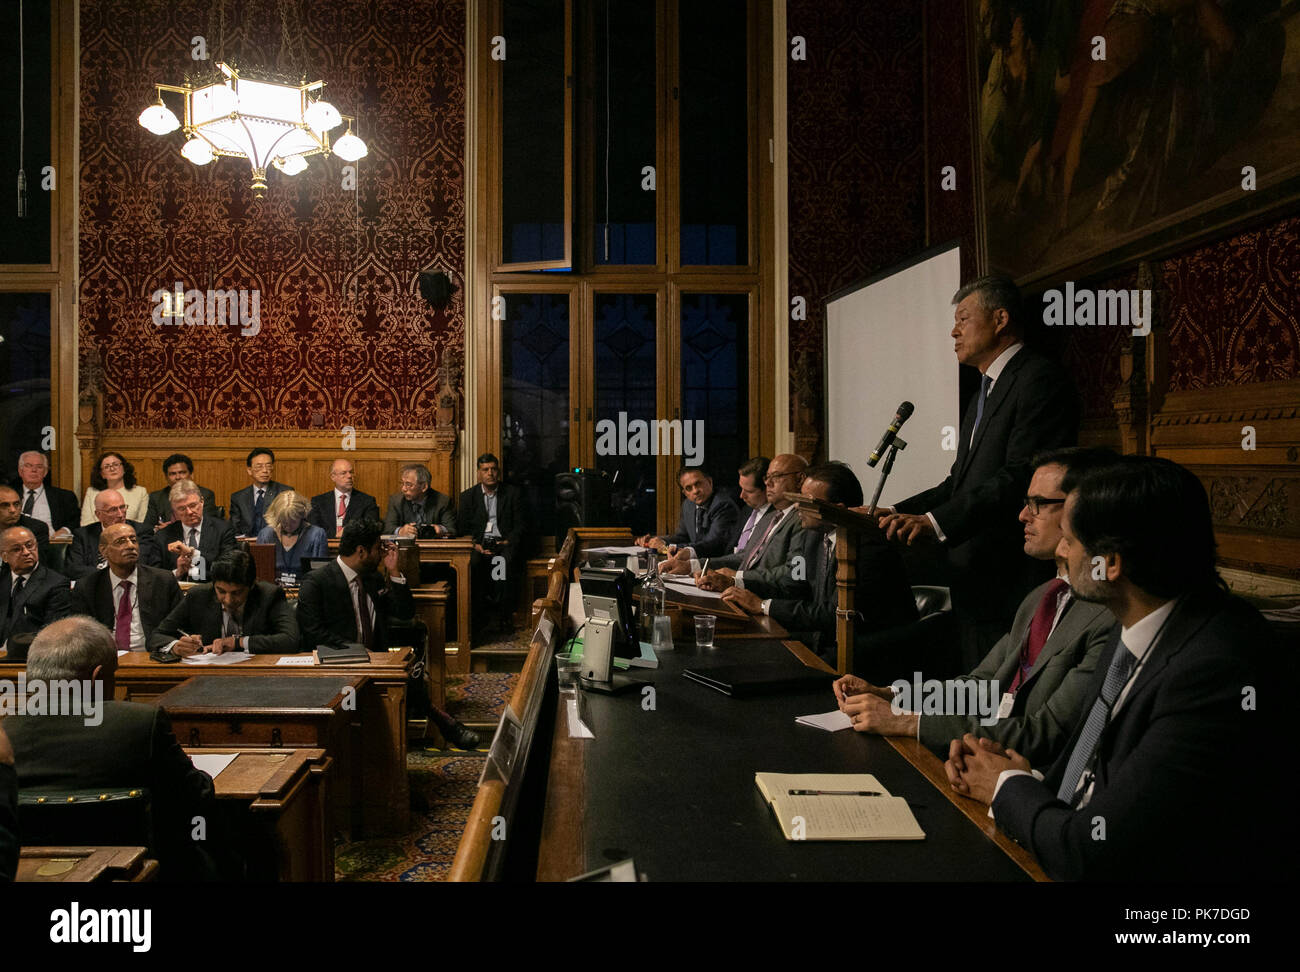 (180911) -- LONDON, Sept. 11, 2018 (Xinhua) -- Chinese Ambassador to Britain Liu Xiaoming (3rd R) delivers a keynote speech during the launching ceremony of the All-Party Parliamentary Group (APPG) for the Belt and Road Initiative (BRI) and China-Pakistan Economic Corridor (CPEC), in London, Britain on Sept. 10, 2018. Chinese Ambassador to Britain Liu Xiaoming said on Monday that he hopes the newly launched UK parliament group for the Belt and Road Initiative will serve as a bridge of communication and bring in more British public support for and participation in the initiative. (Xinhua/Han Ya Stock Photo